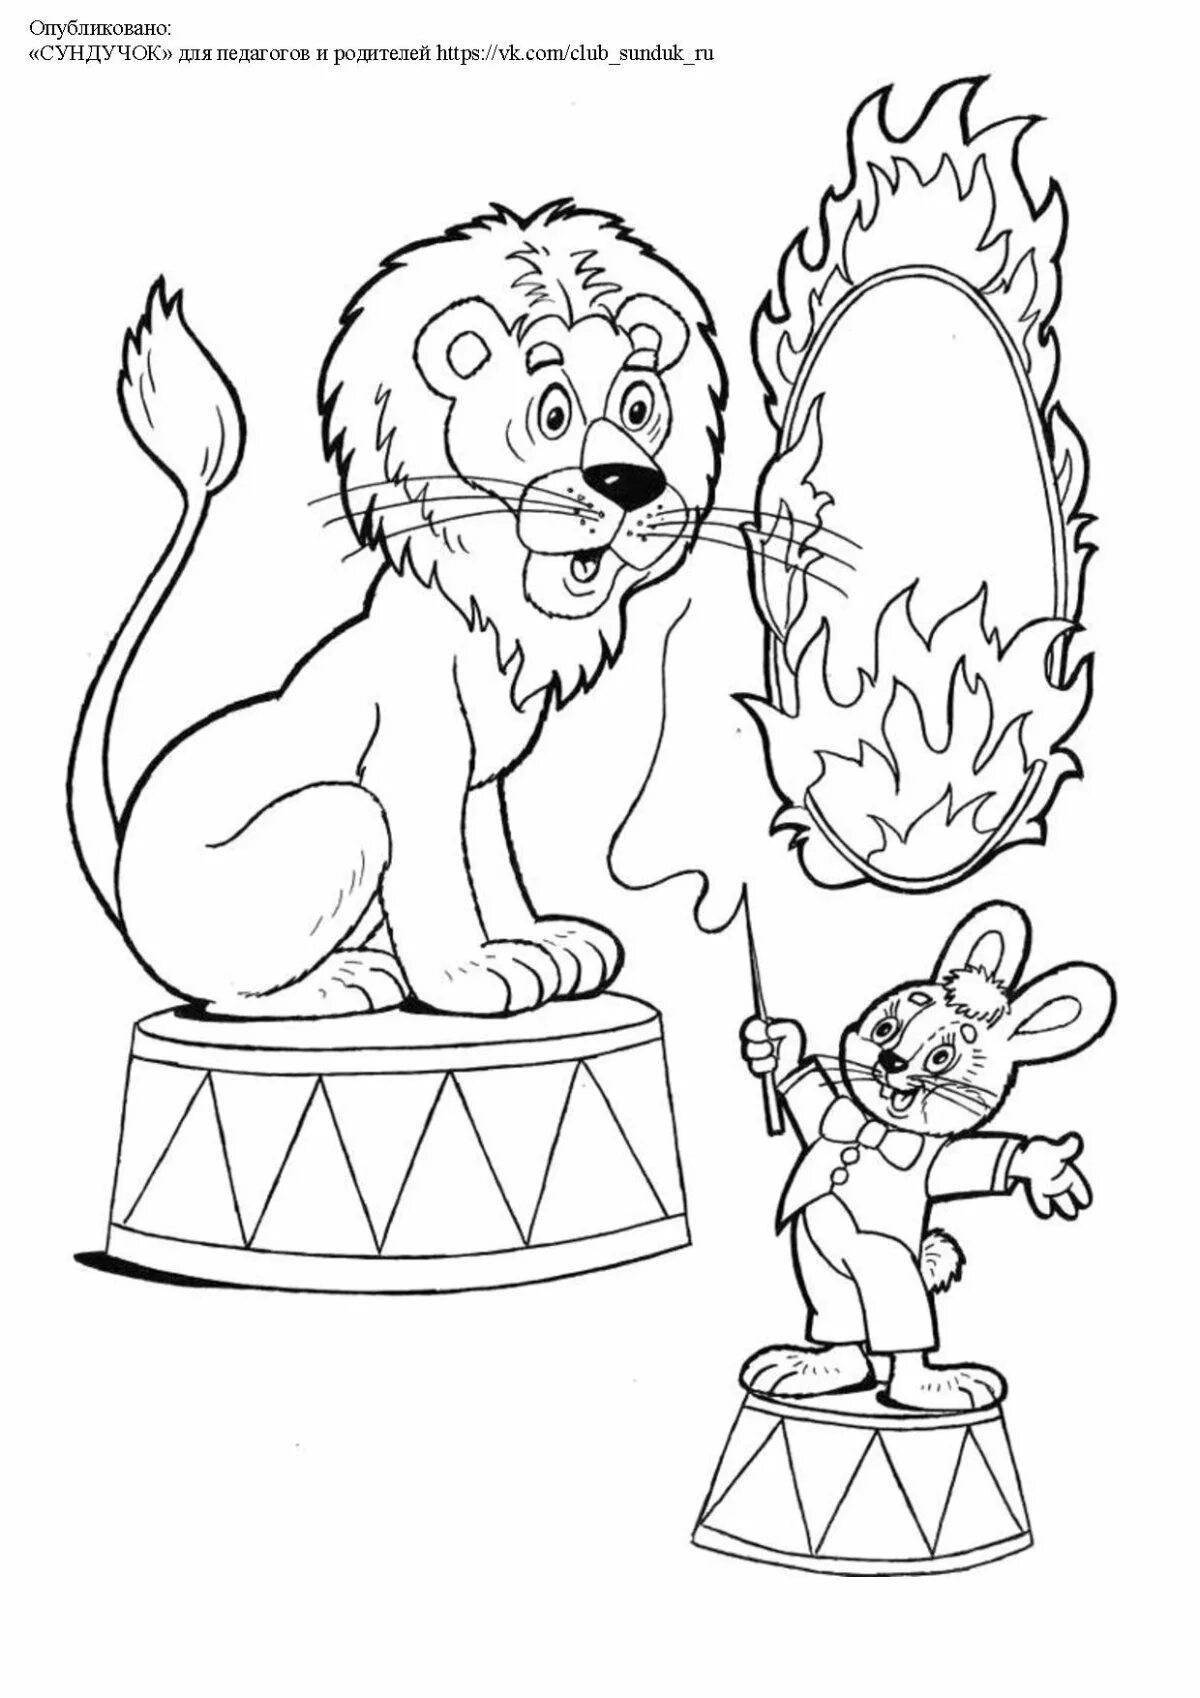 Fun circus coloring book for 5-6 year olds